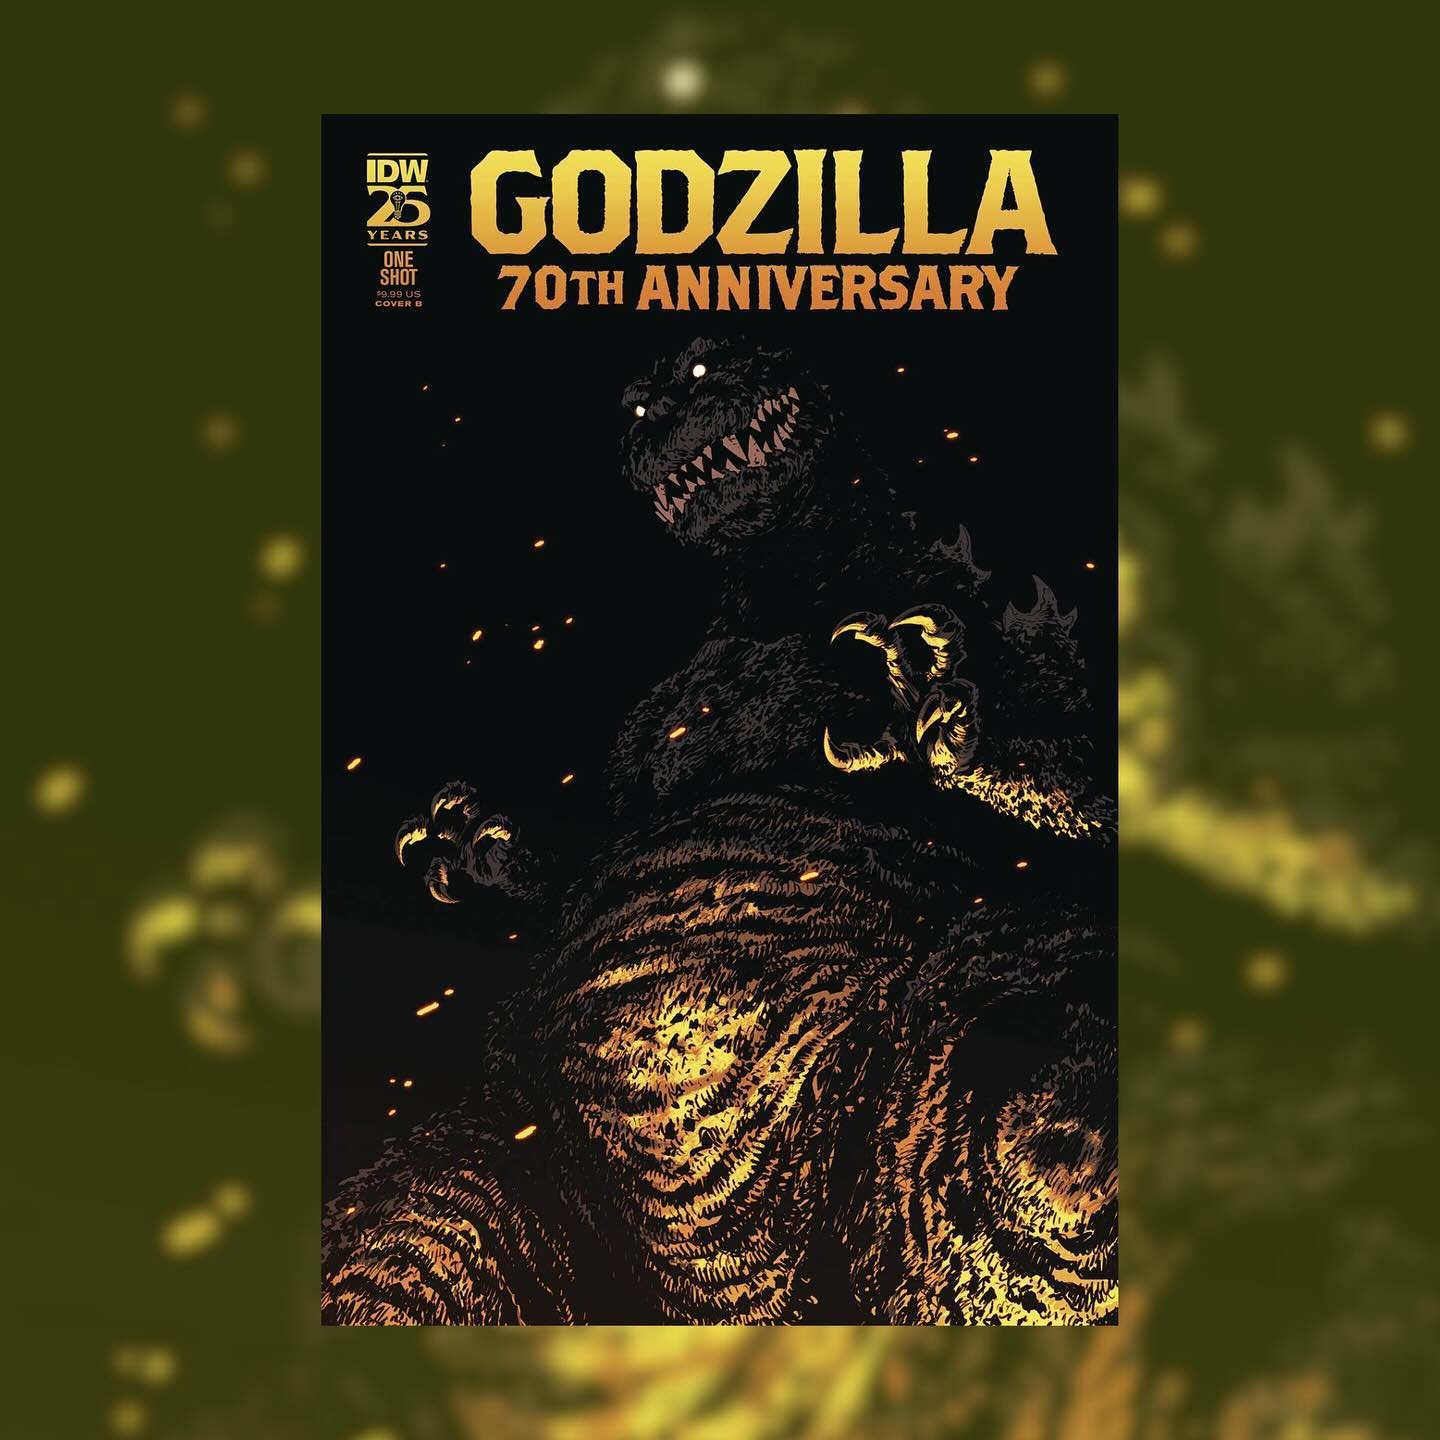 Excited to officially announce my debut working on @godzilla_toho for the 70th anniversary @idwpublishing one shot, with @shark_fight and Brittany Peer! Thank you @jake_bwilliams and @davidmariotte for bringing me aboard to work on such an iconic pro